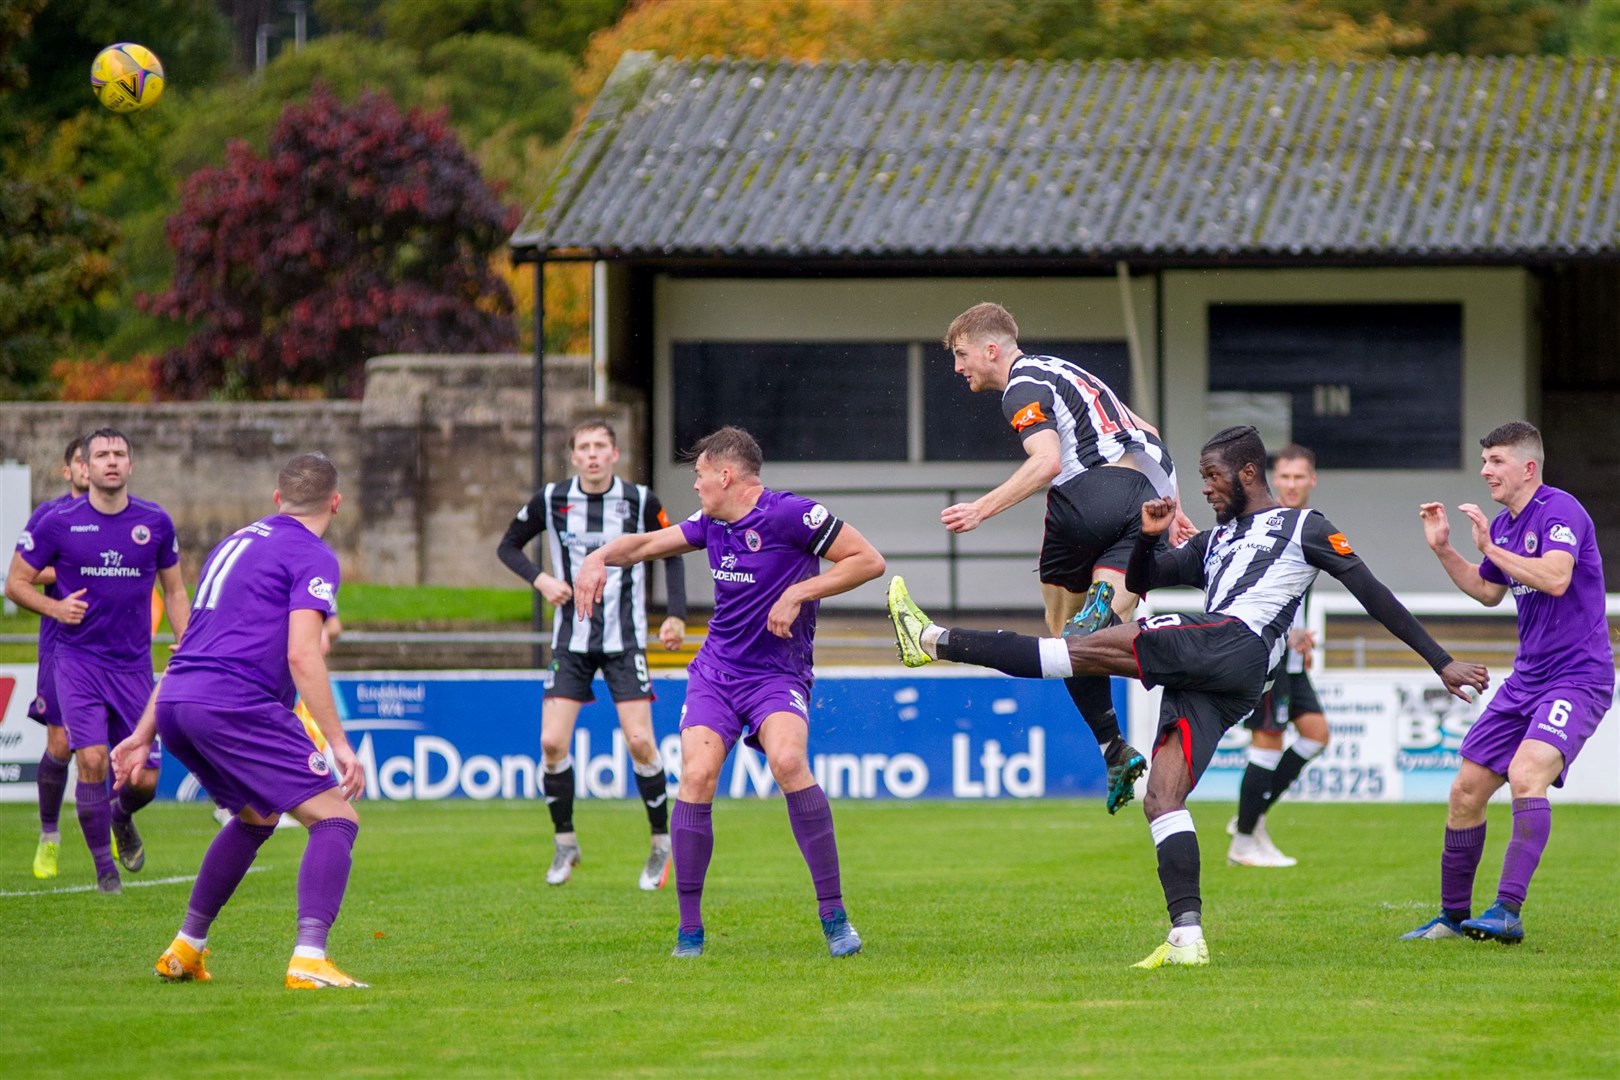 Aidan Sopel (in the air) headed Elgin City's winner at Stirling - his first goal for the club.